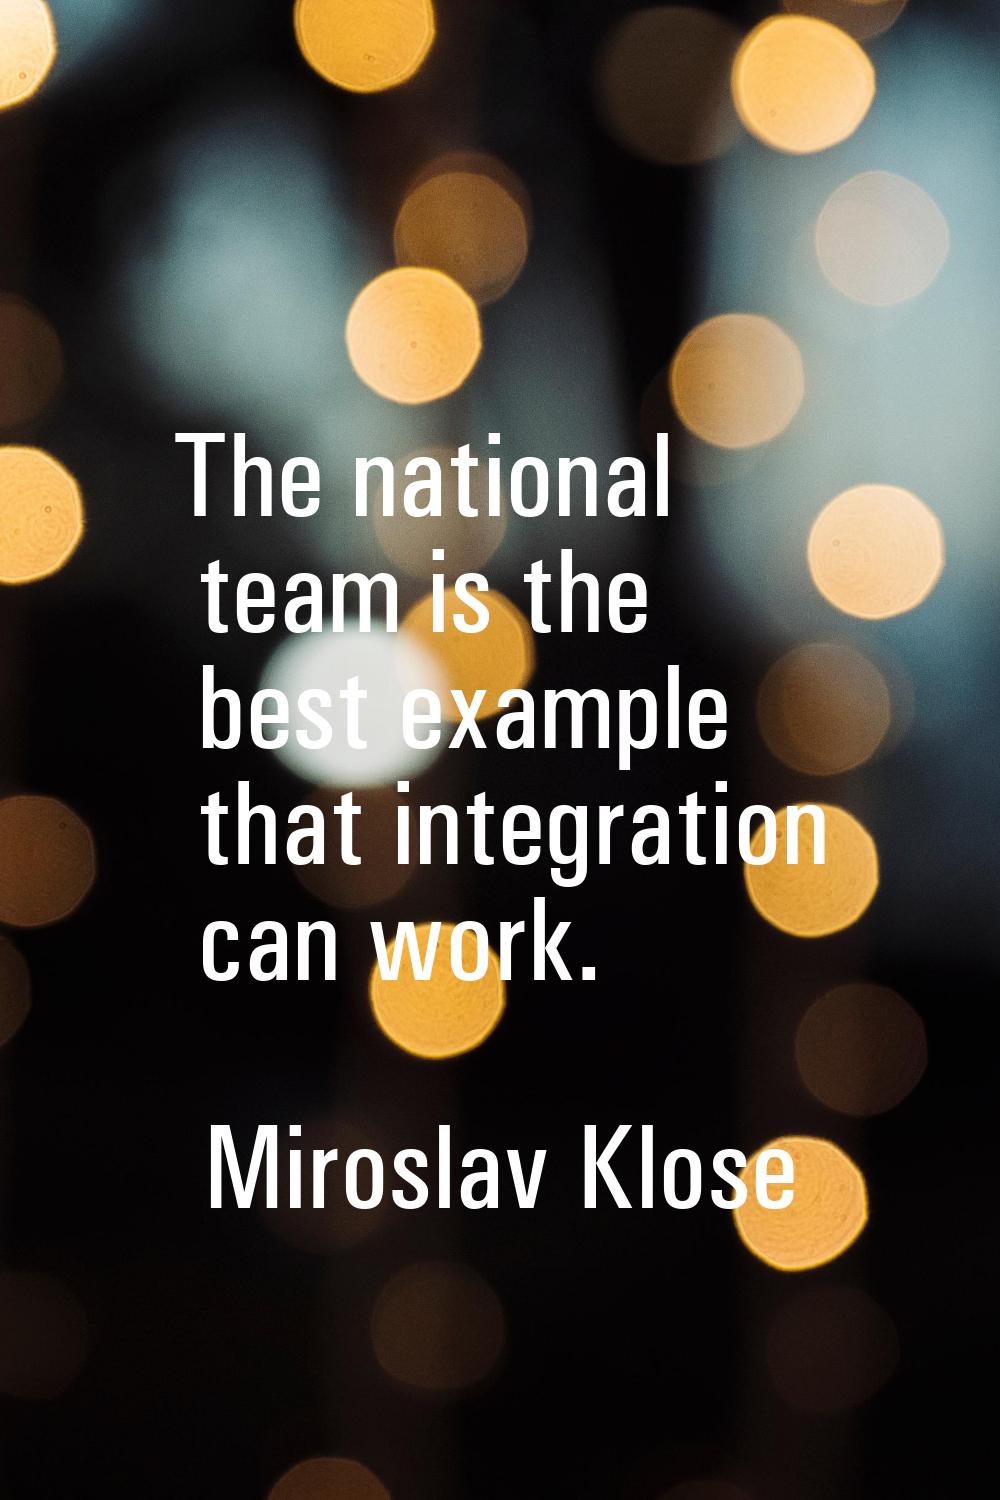 The national team is the best example that integration can work.